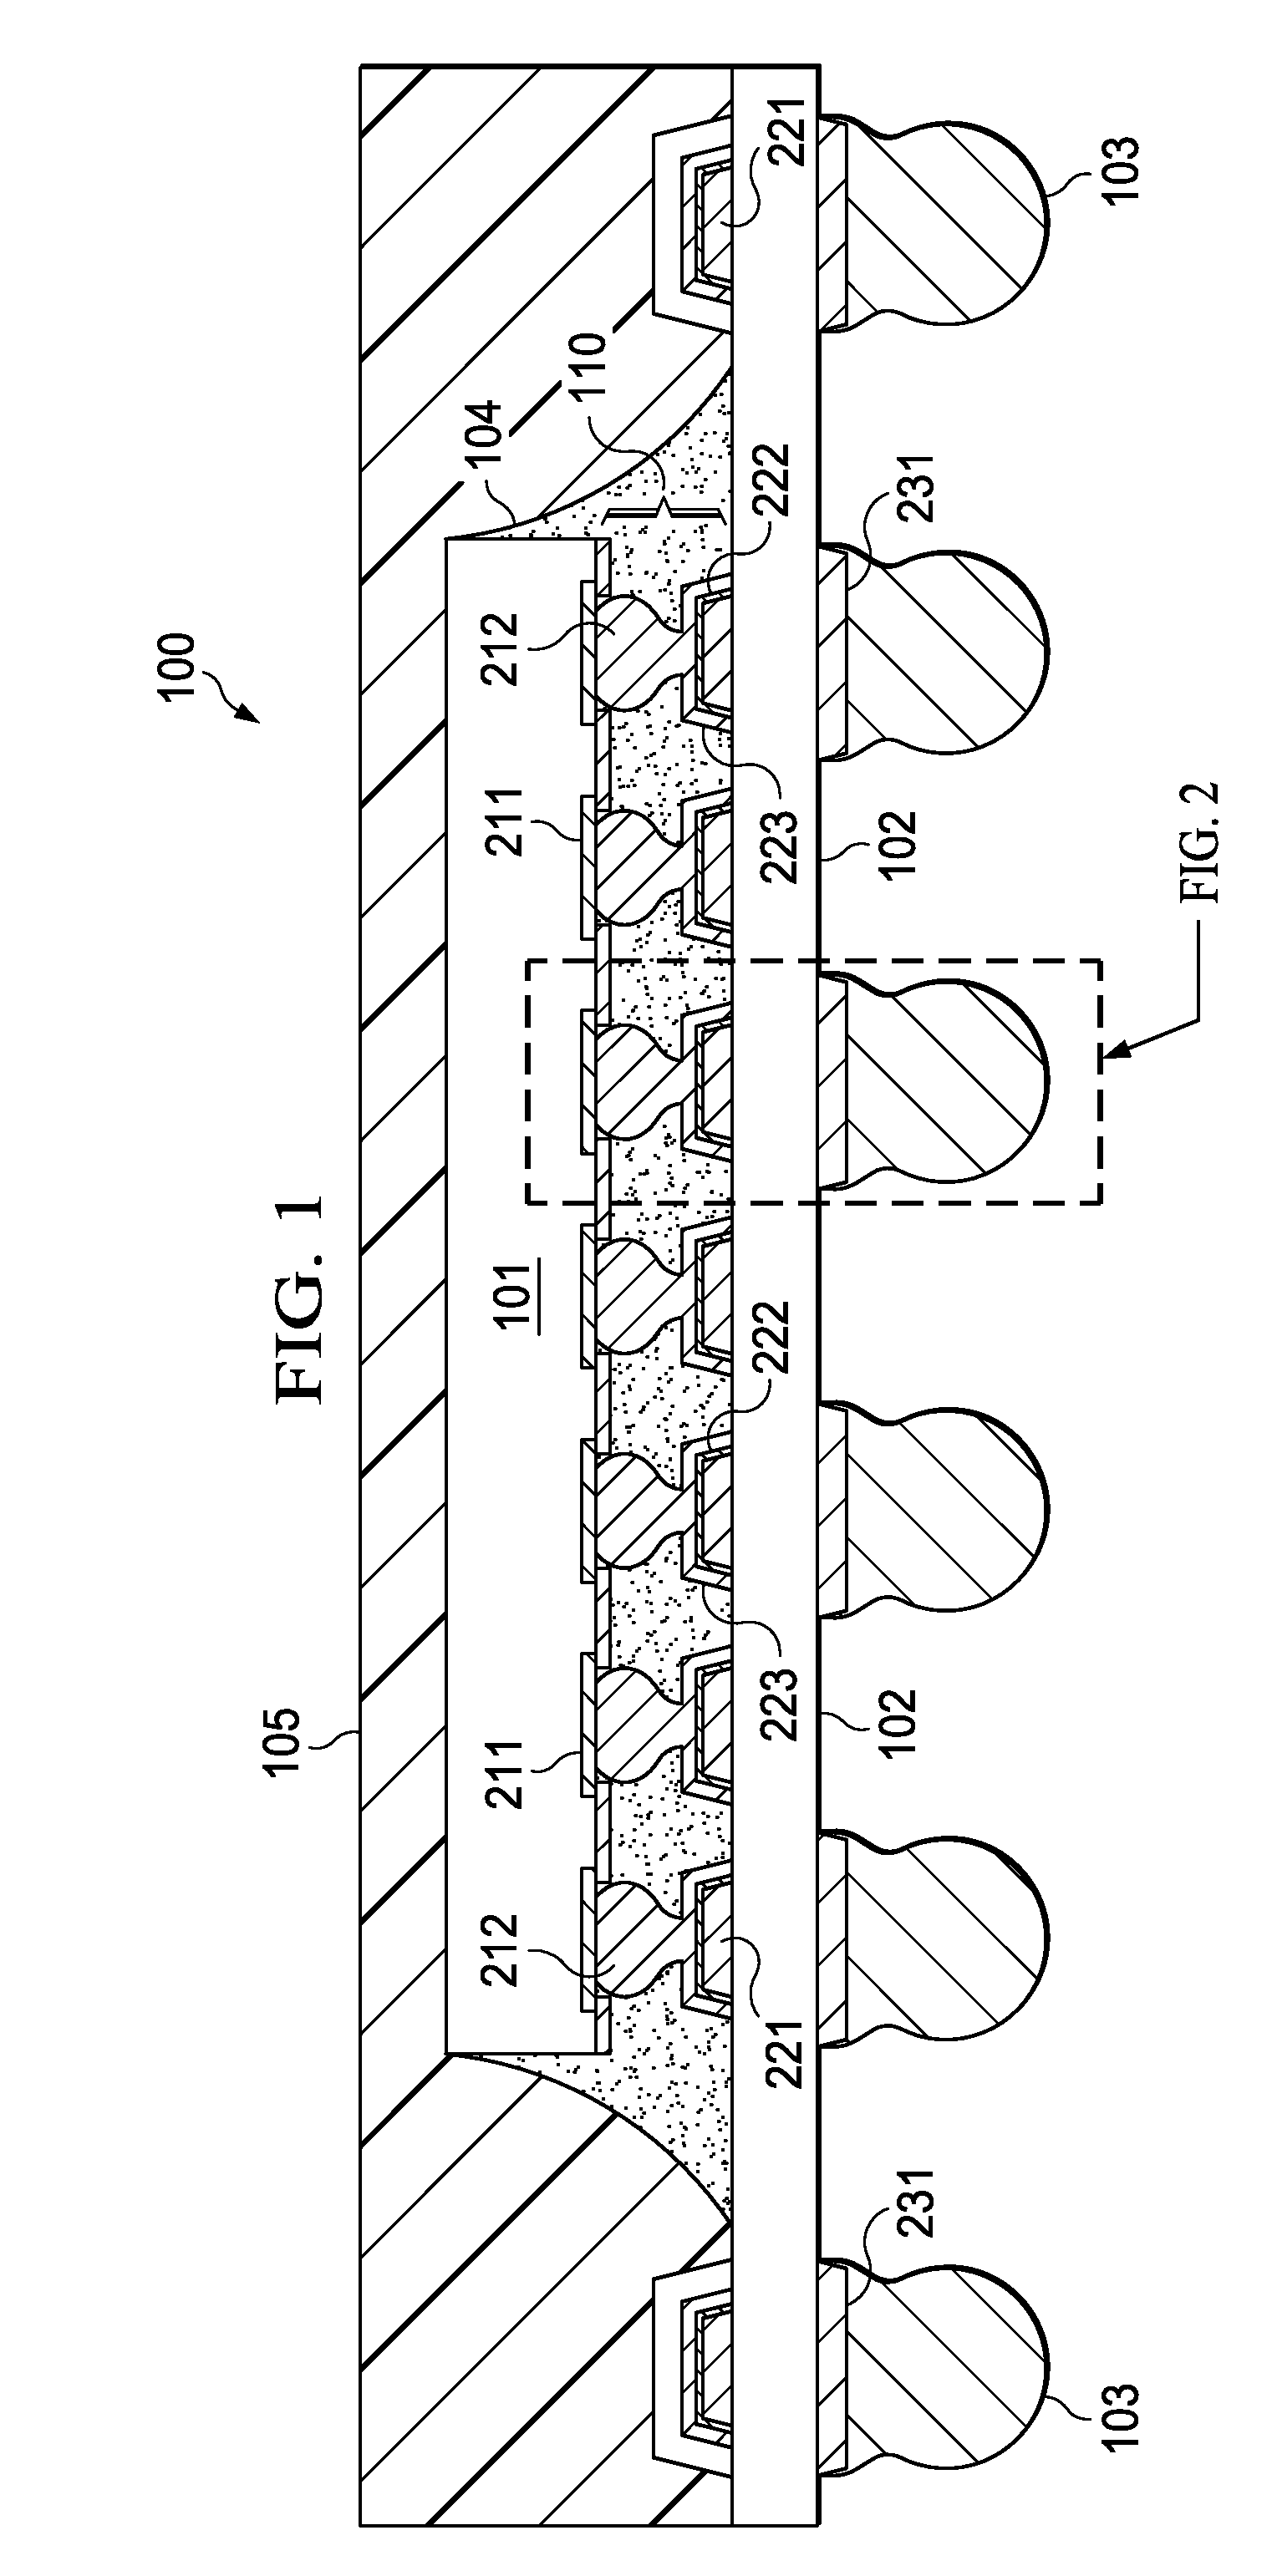 Semiconductor device having solder-free gold bump contacts for stability in repeated temperature cycles